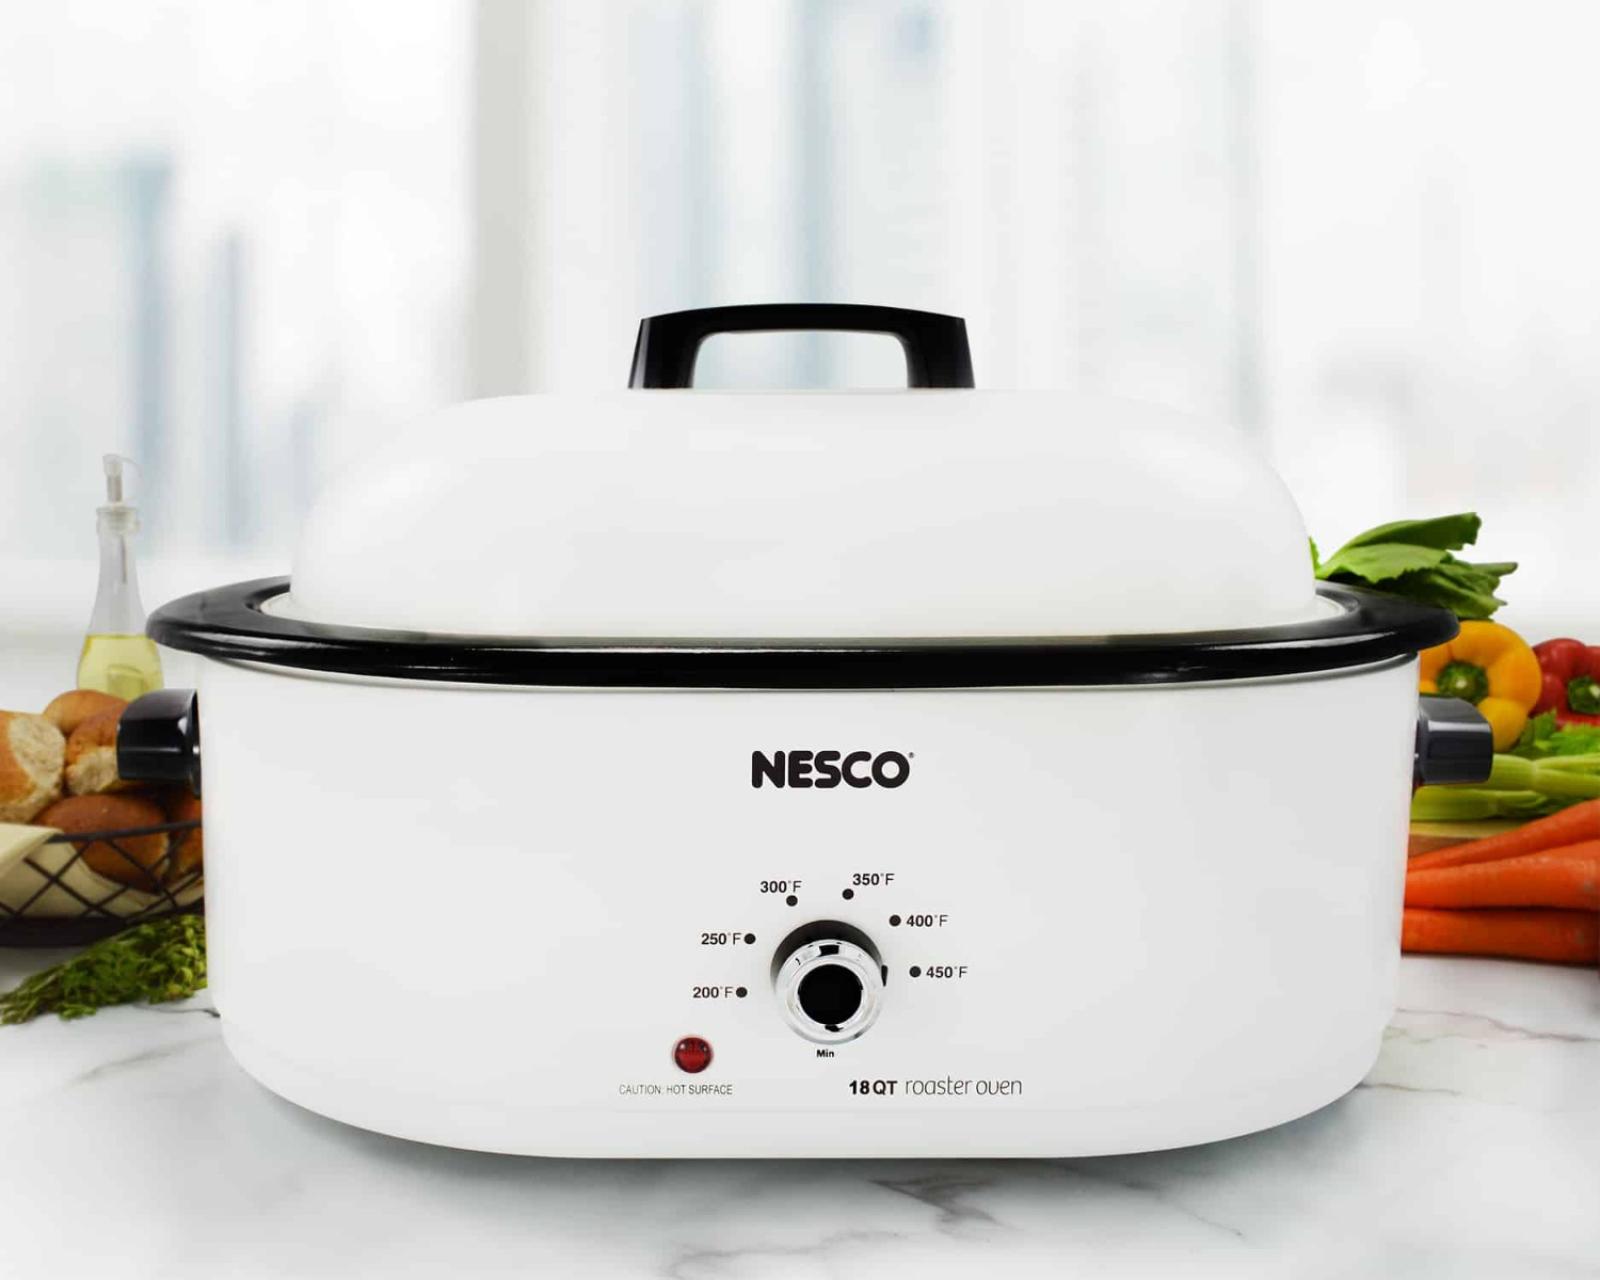 Nesco 18 Qt. Red Roaster Oven Porcelain Cookwell Lifestyle